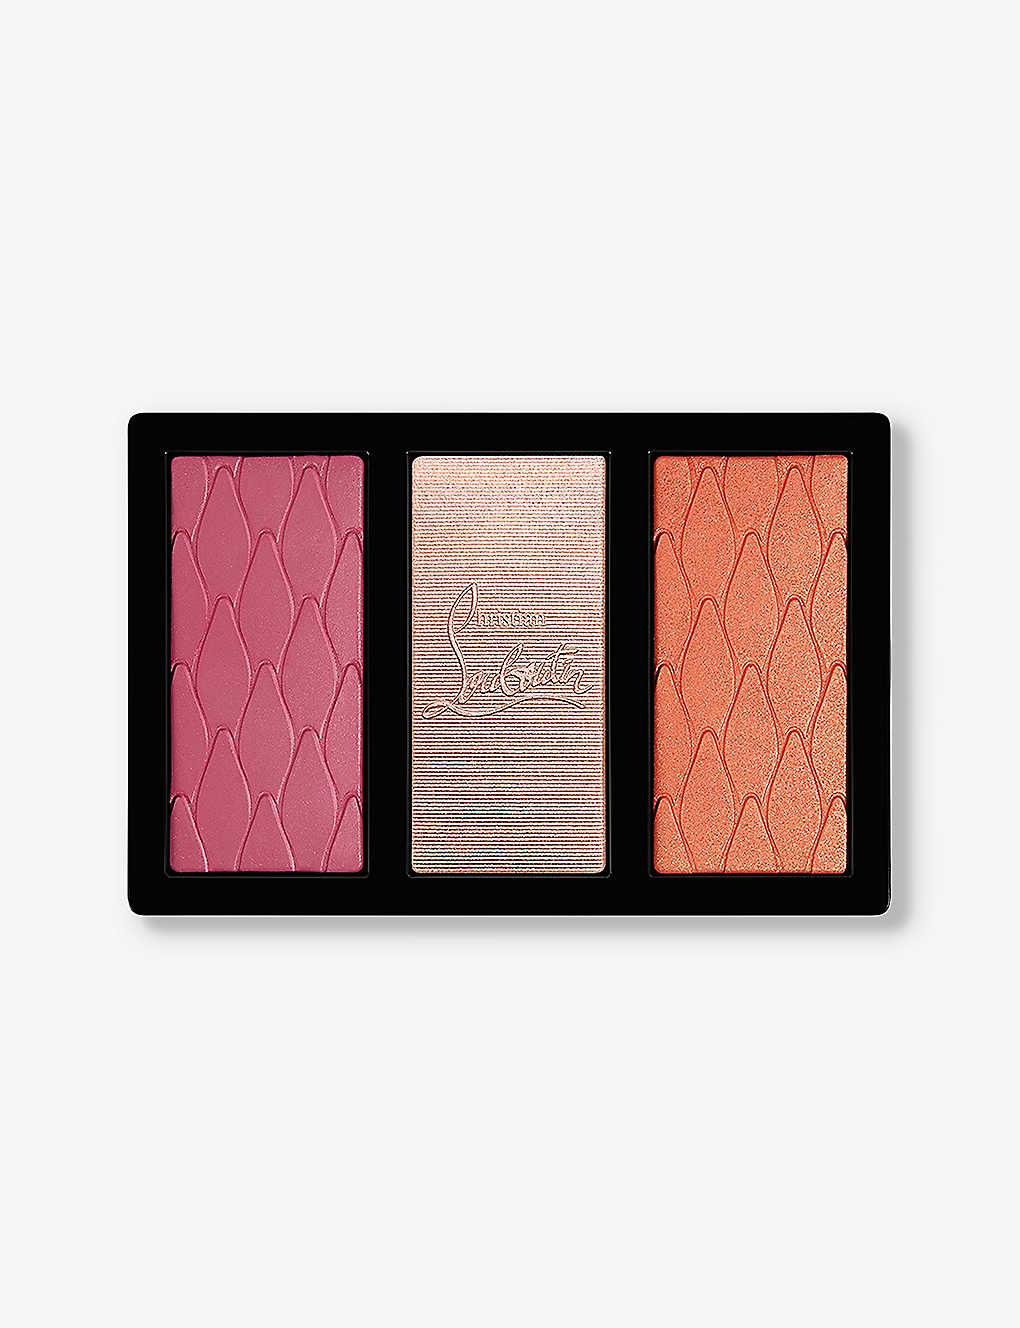 Christian Louboutin 1 So Chick La Palette Blush And Highlighter Refill 75g